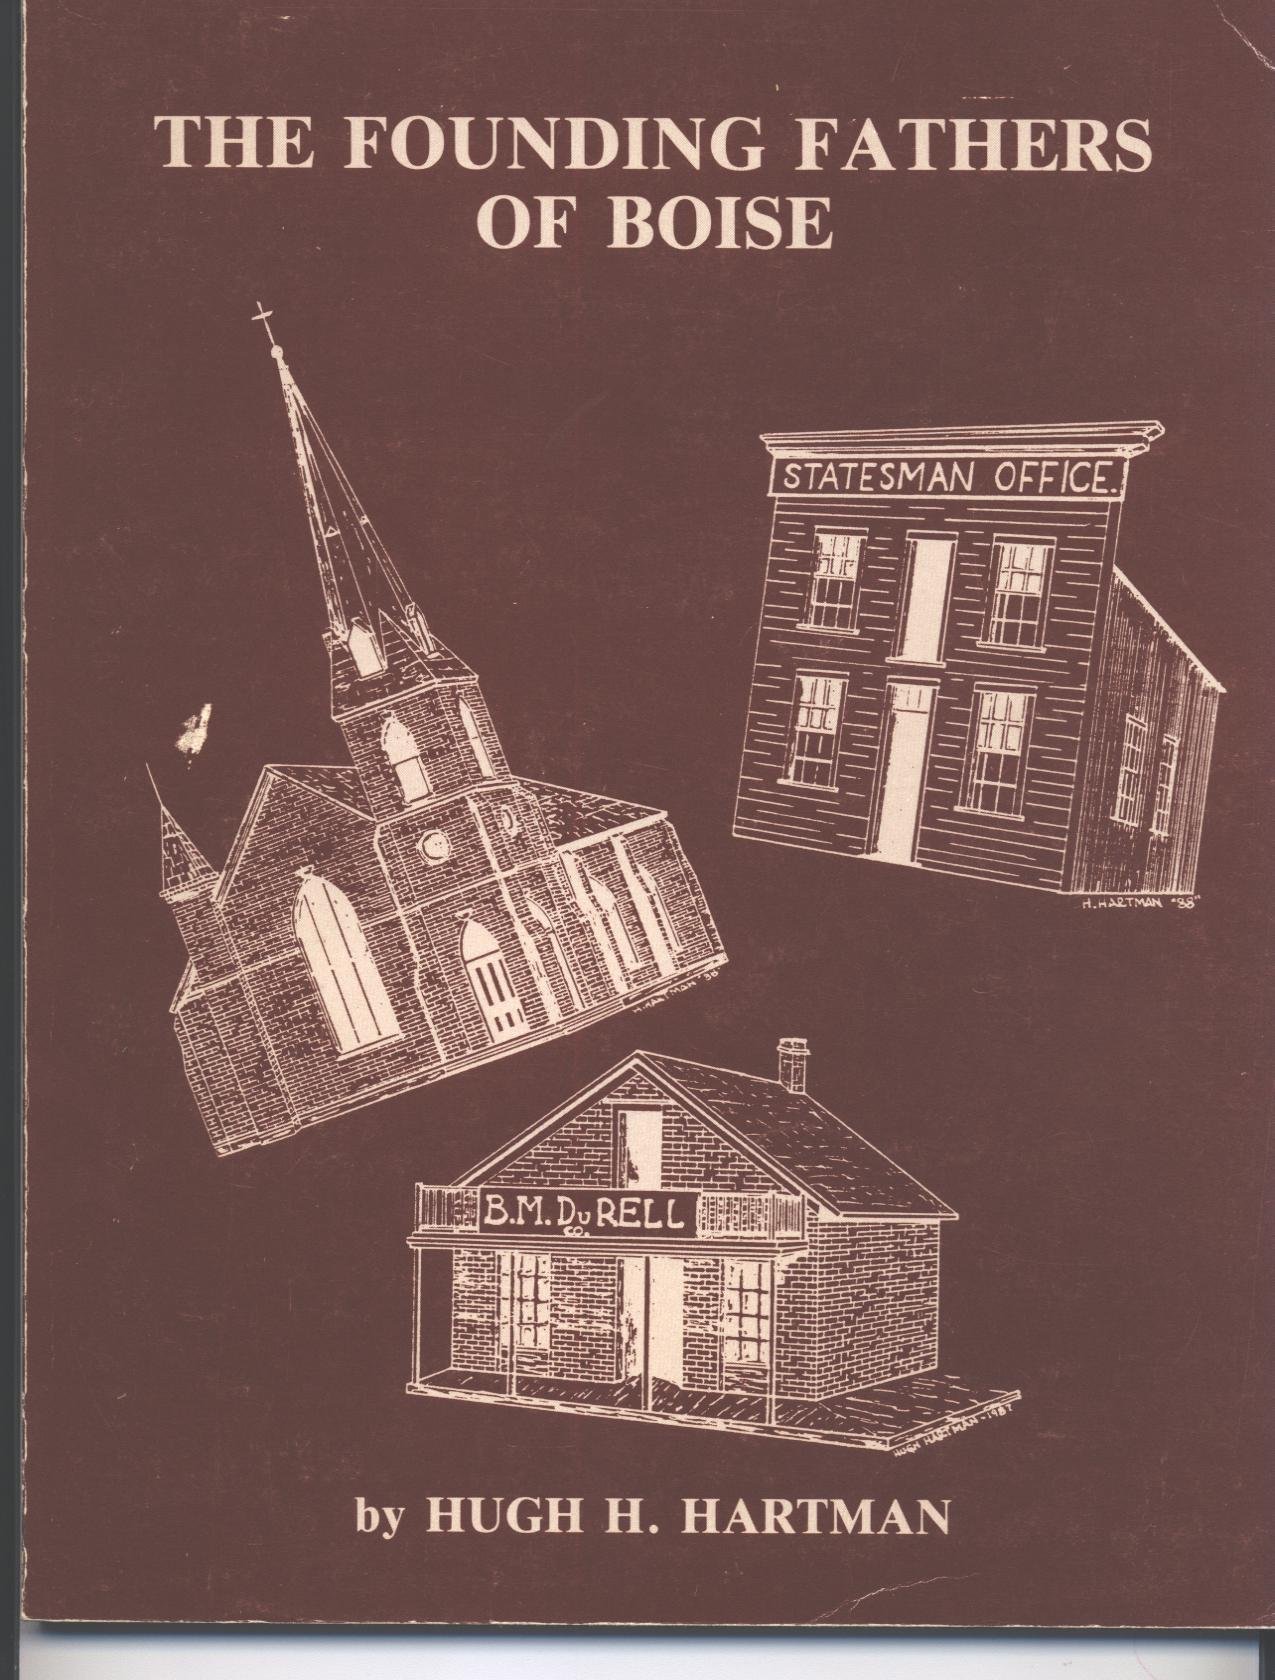 The founding fathers of Boise, 1863-1875 (book cover)